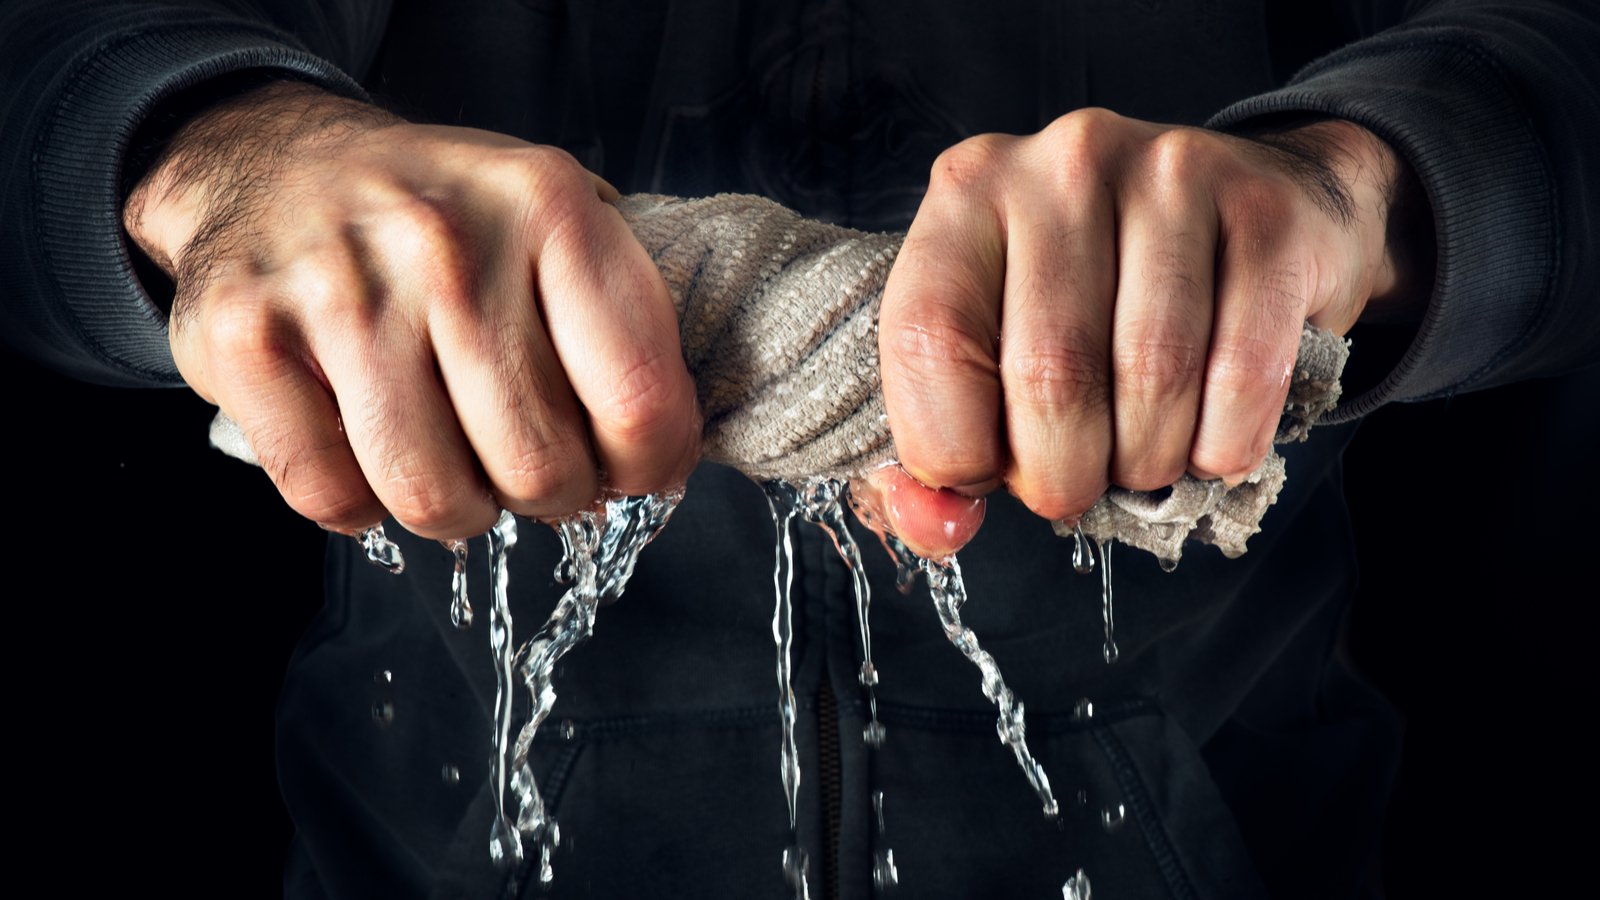 Man squeezing water out of a rag representing short squeeze stocks and QNRX stock.